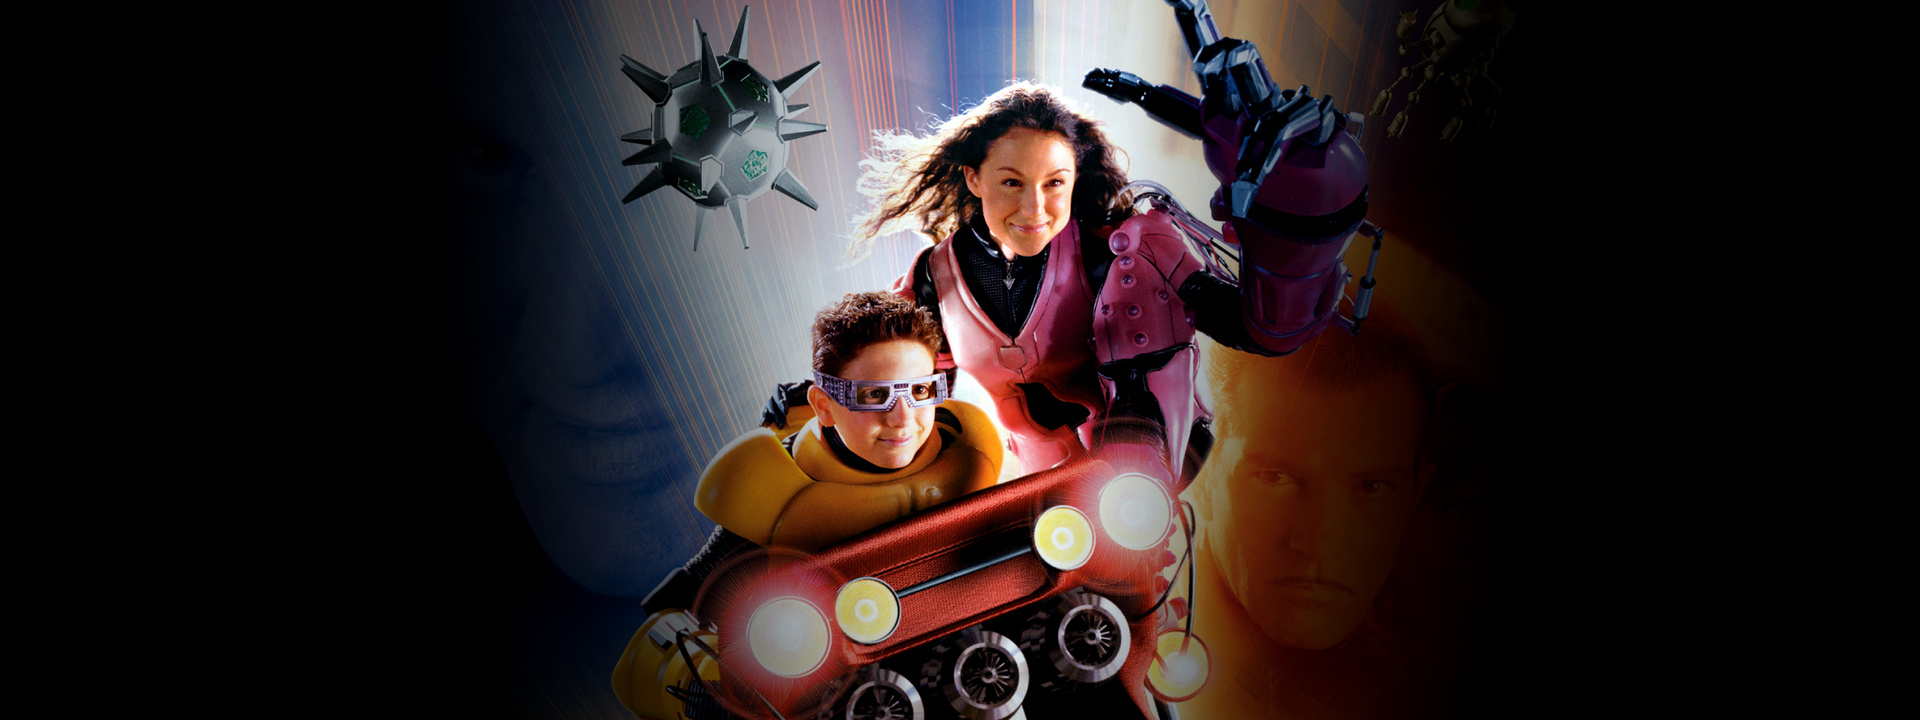 Movie poster Spy Kids 3-D: Game Over